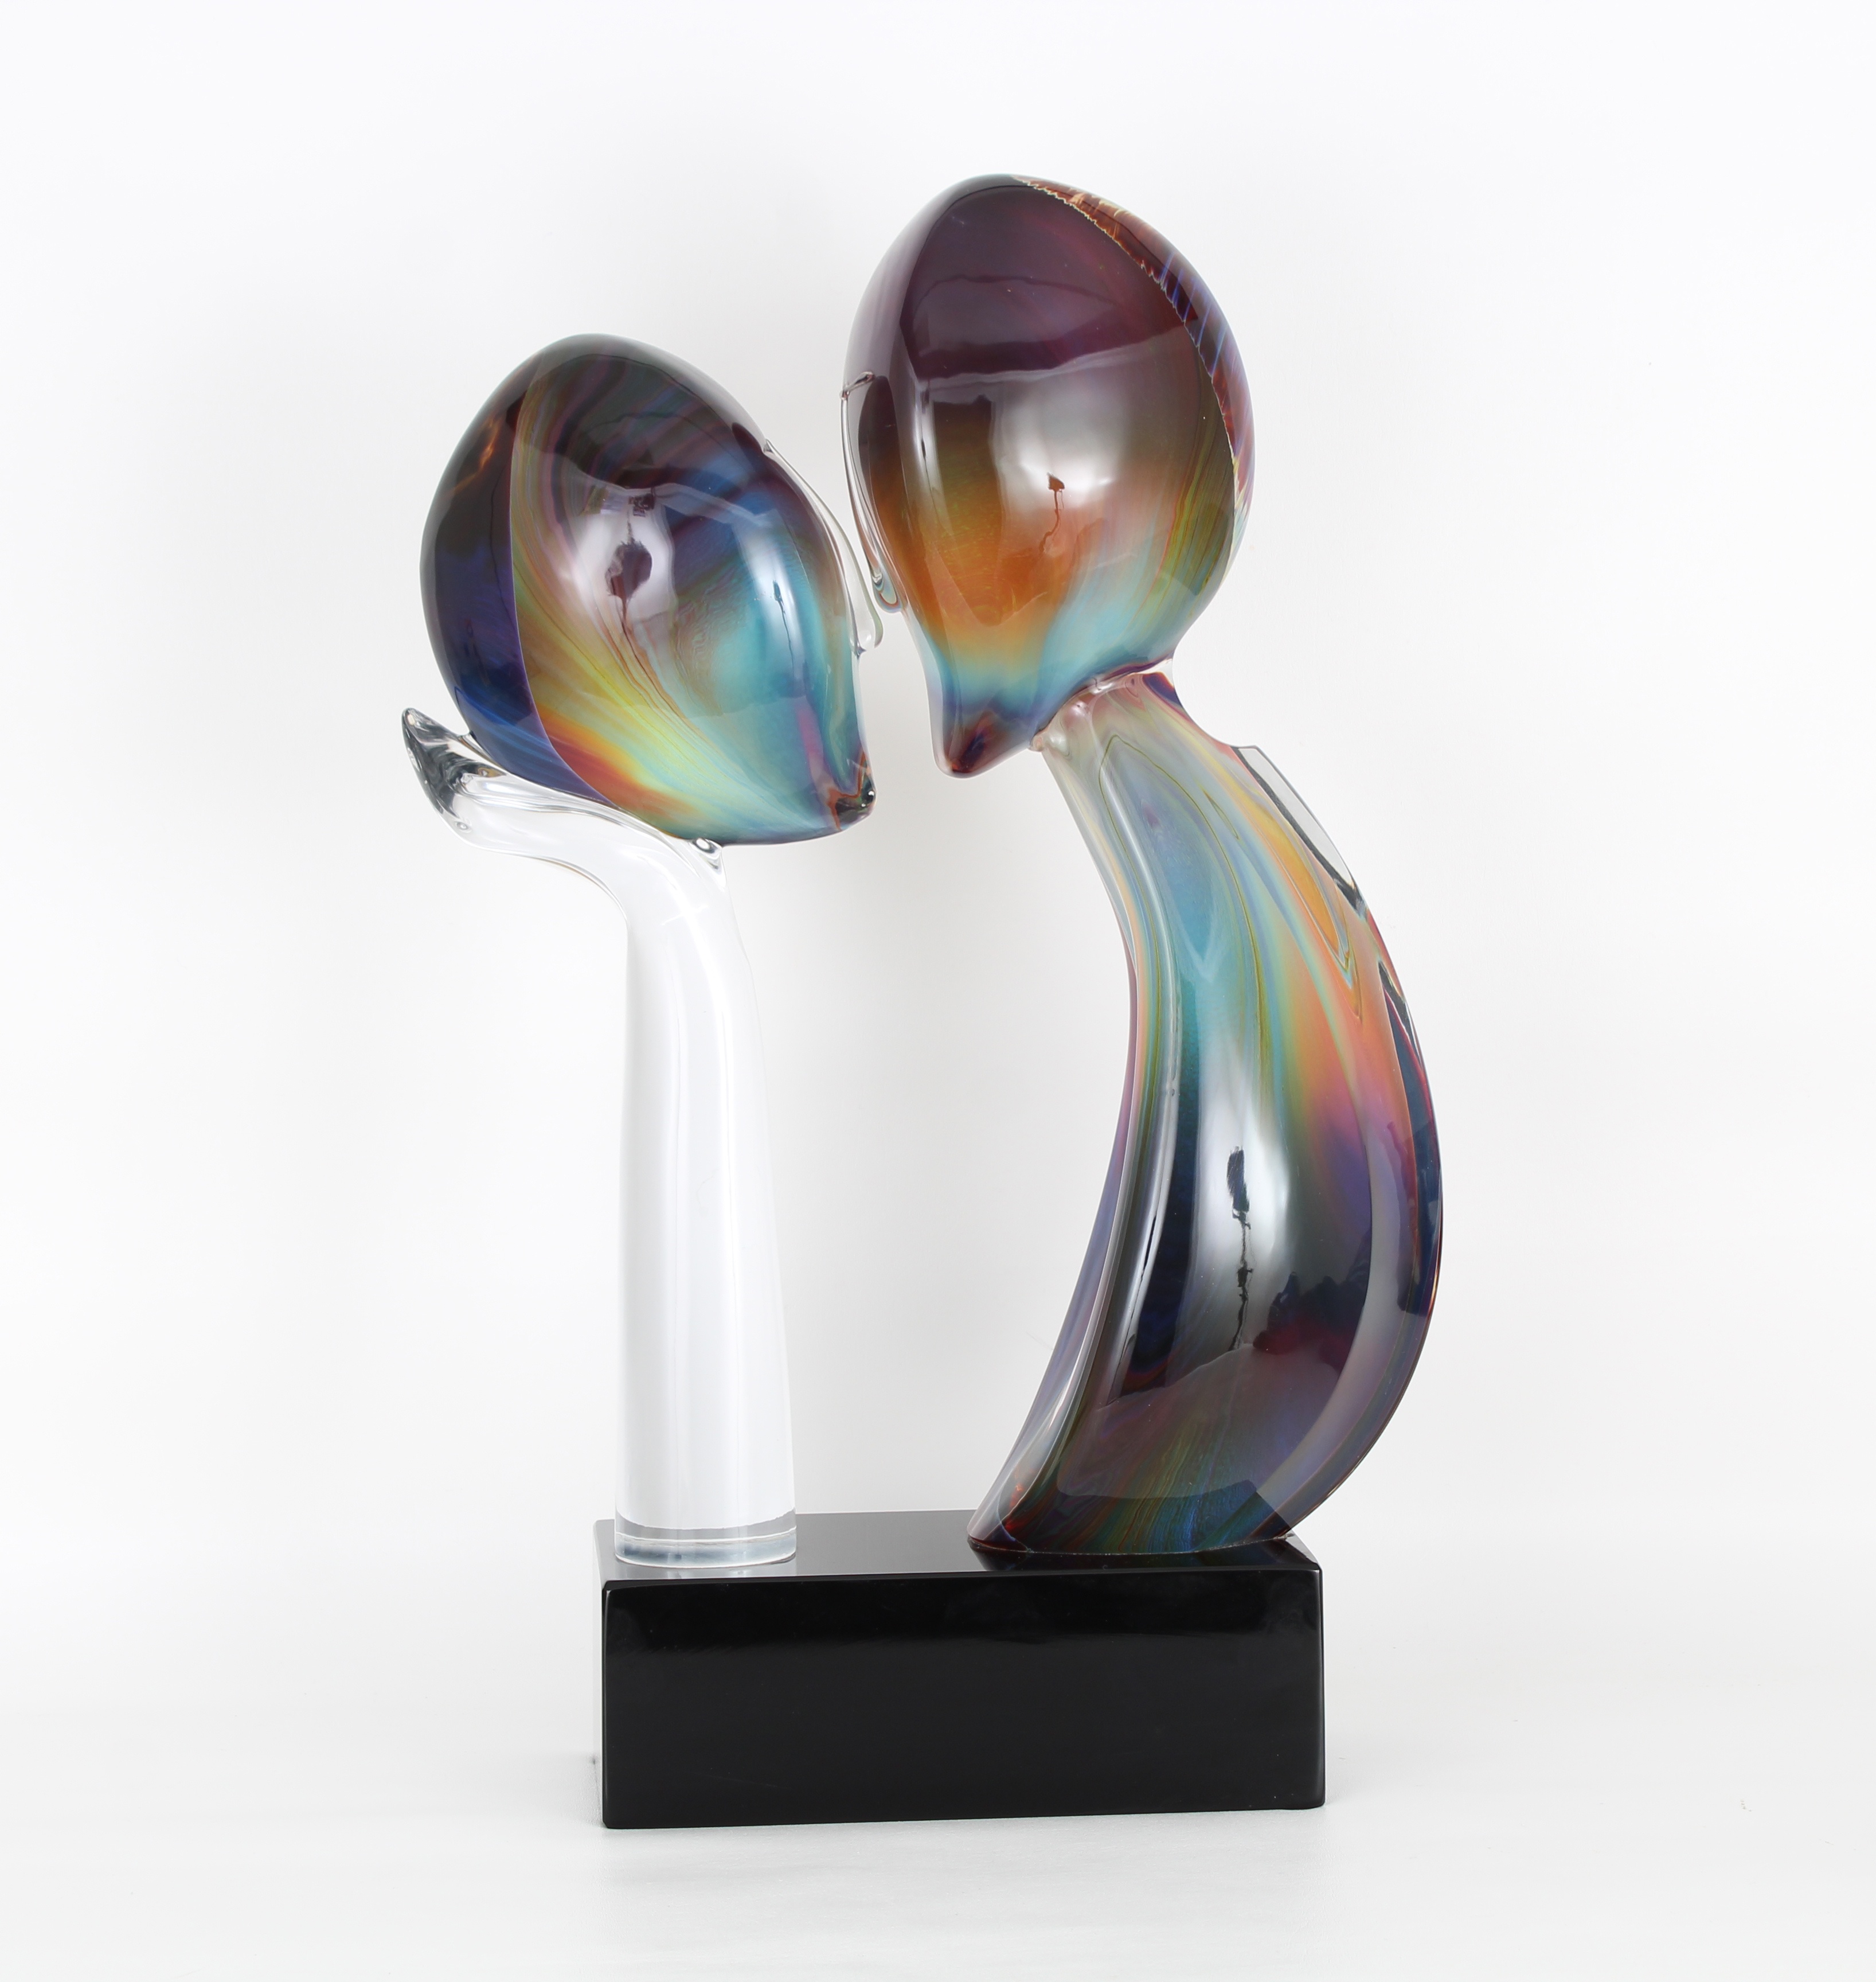 Dino Rosin "The Kiss" Glass Sculpture - Image 4 of 9